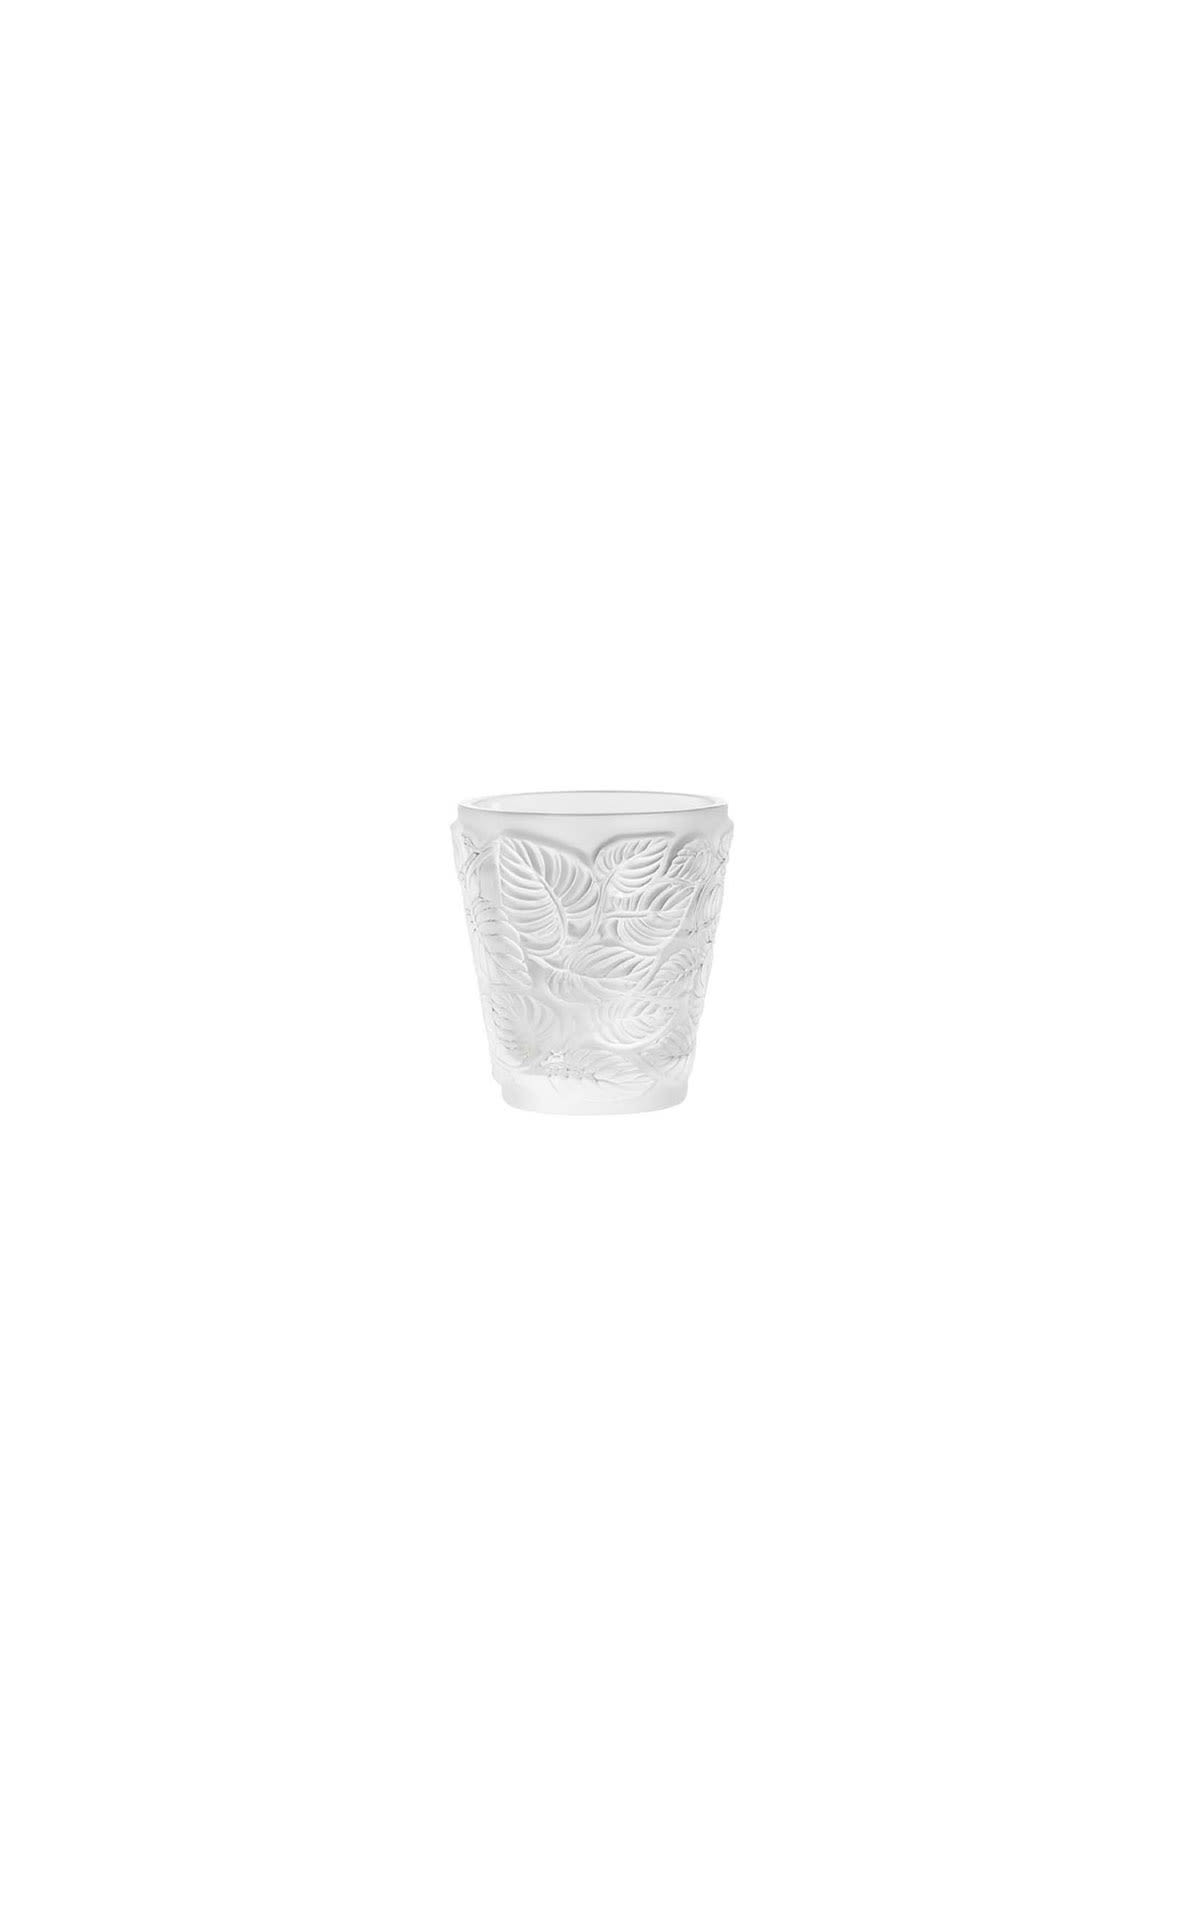 Lalique Feuilles candle holder  from Bicester Village